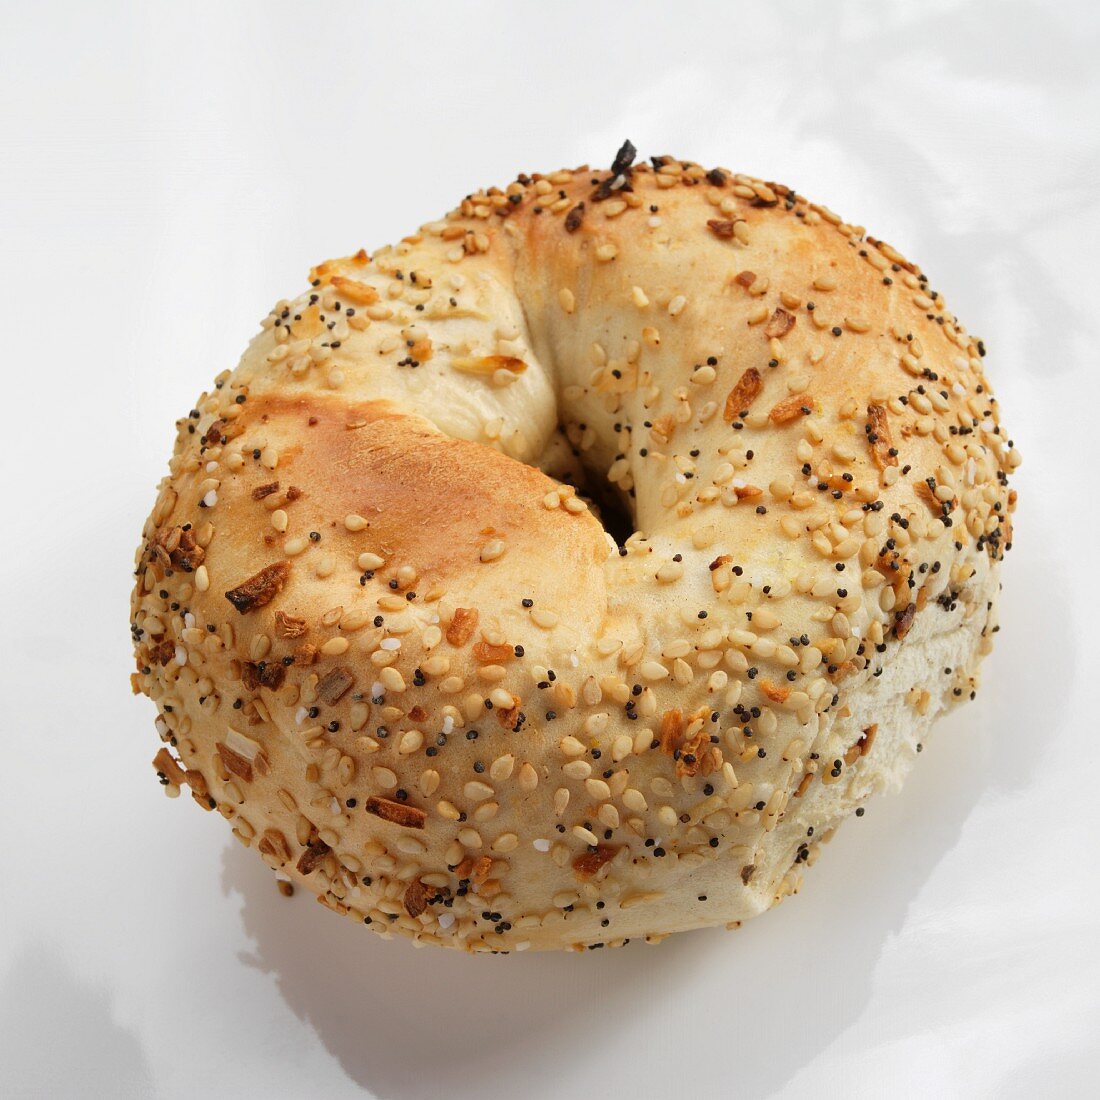 A Single Everything Bagel on a White Background